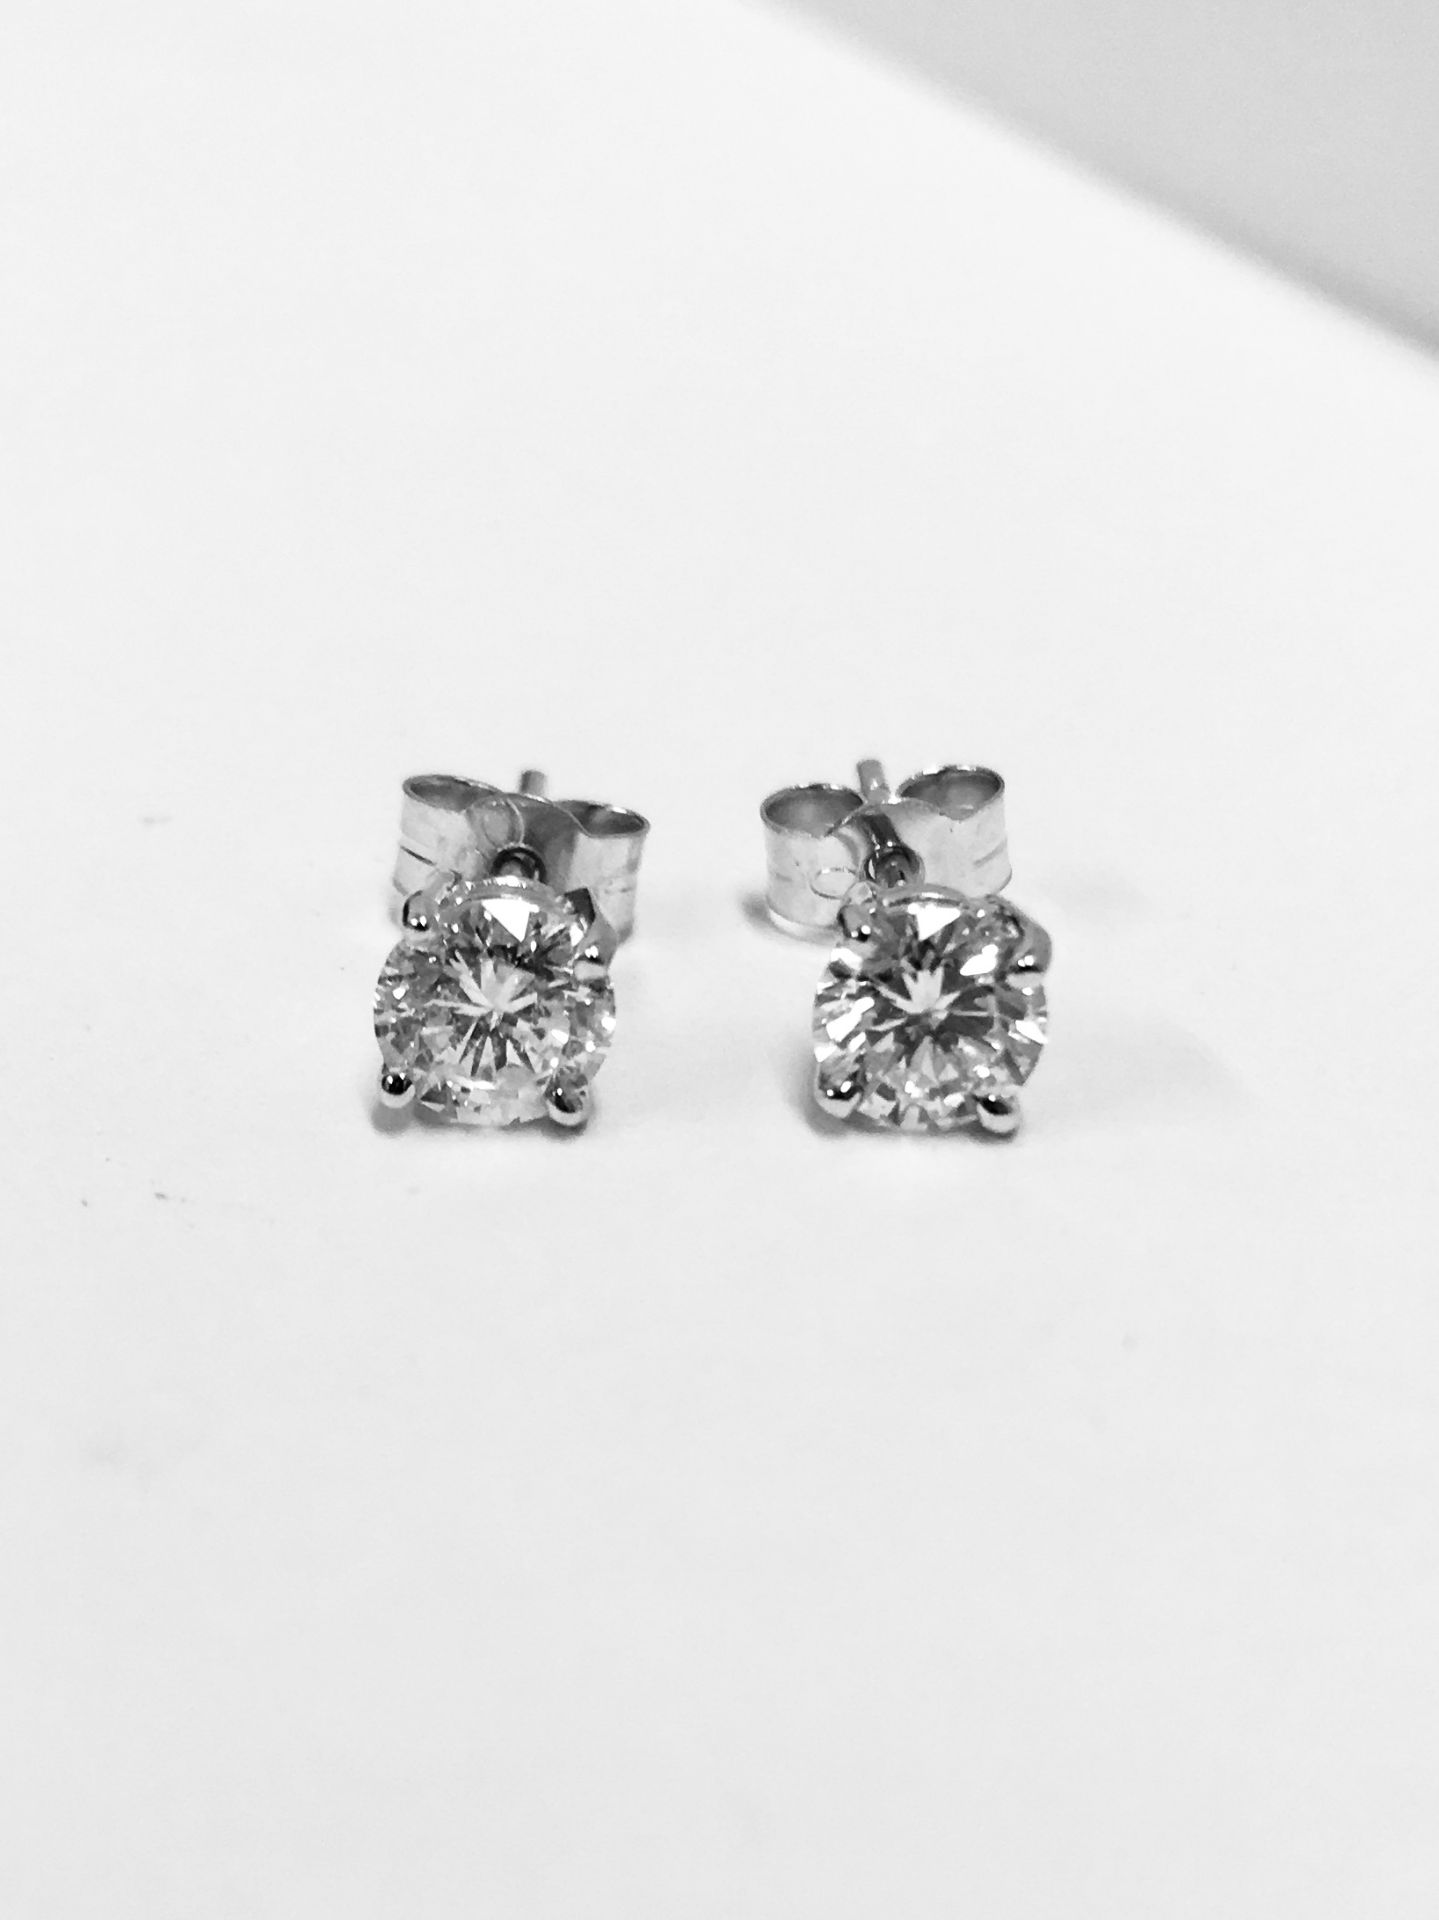 1.50Ct Diamond Solitaire Earrings Set In 18Ct White Gold. - Image 3 of 8